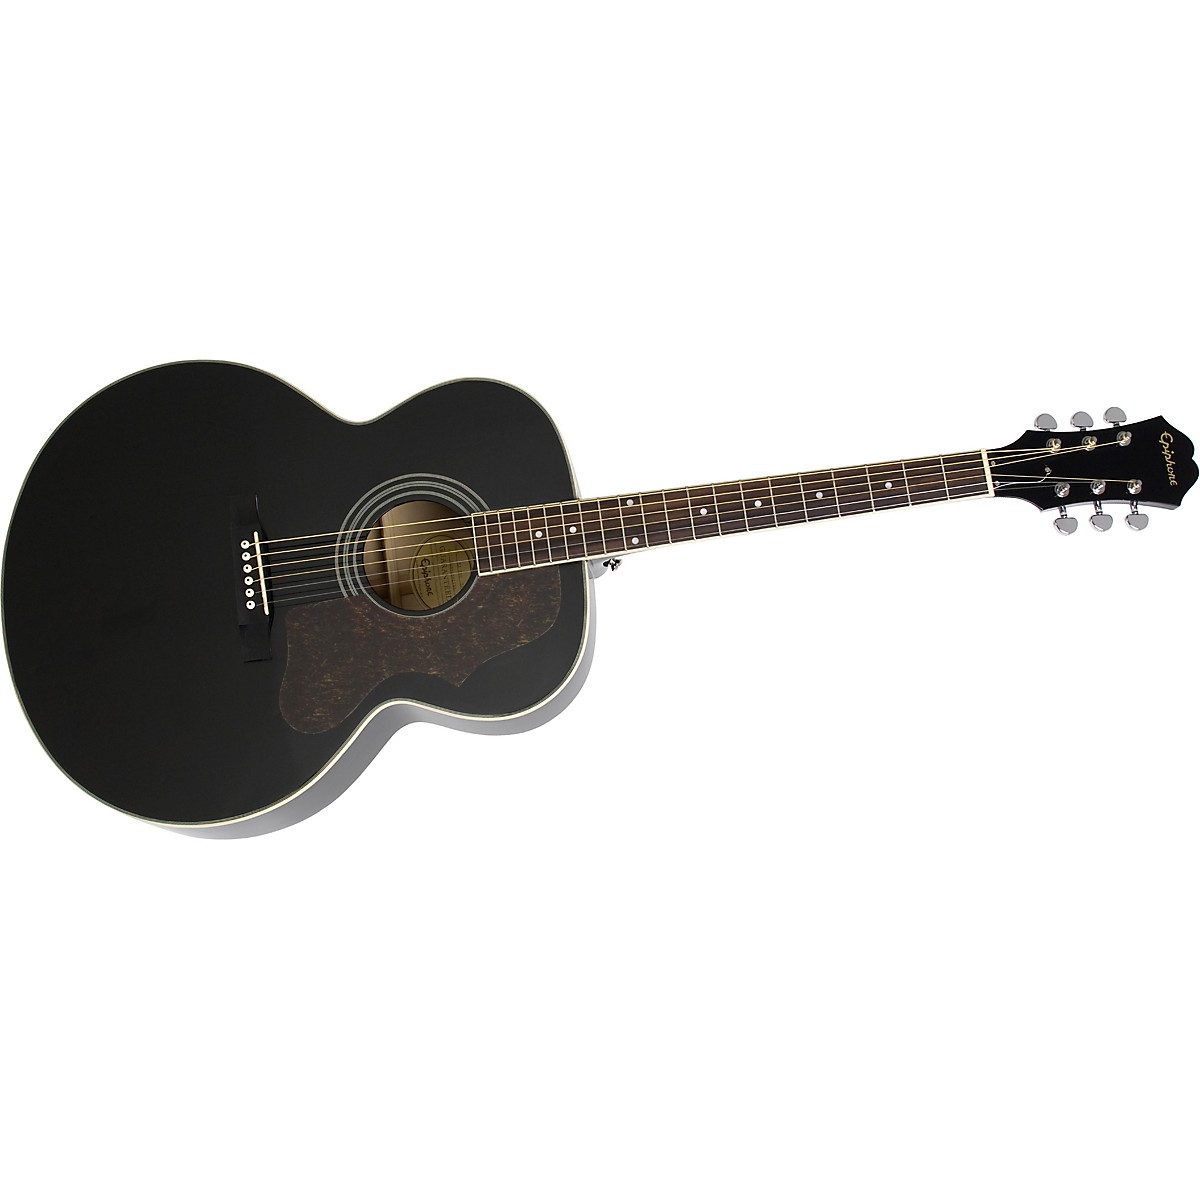 Epiphone Limited Edition EJ200 Artist Acoustic Guitar